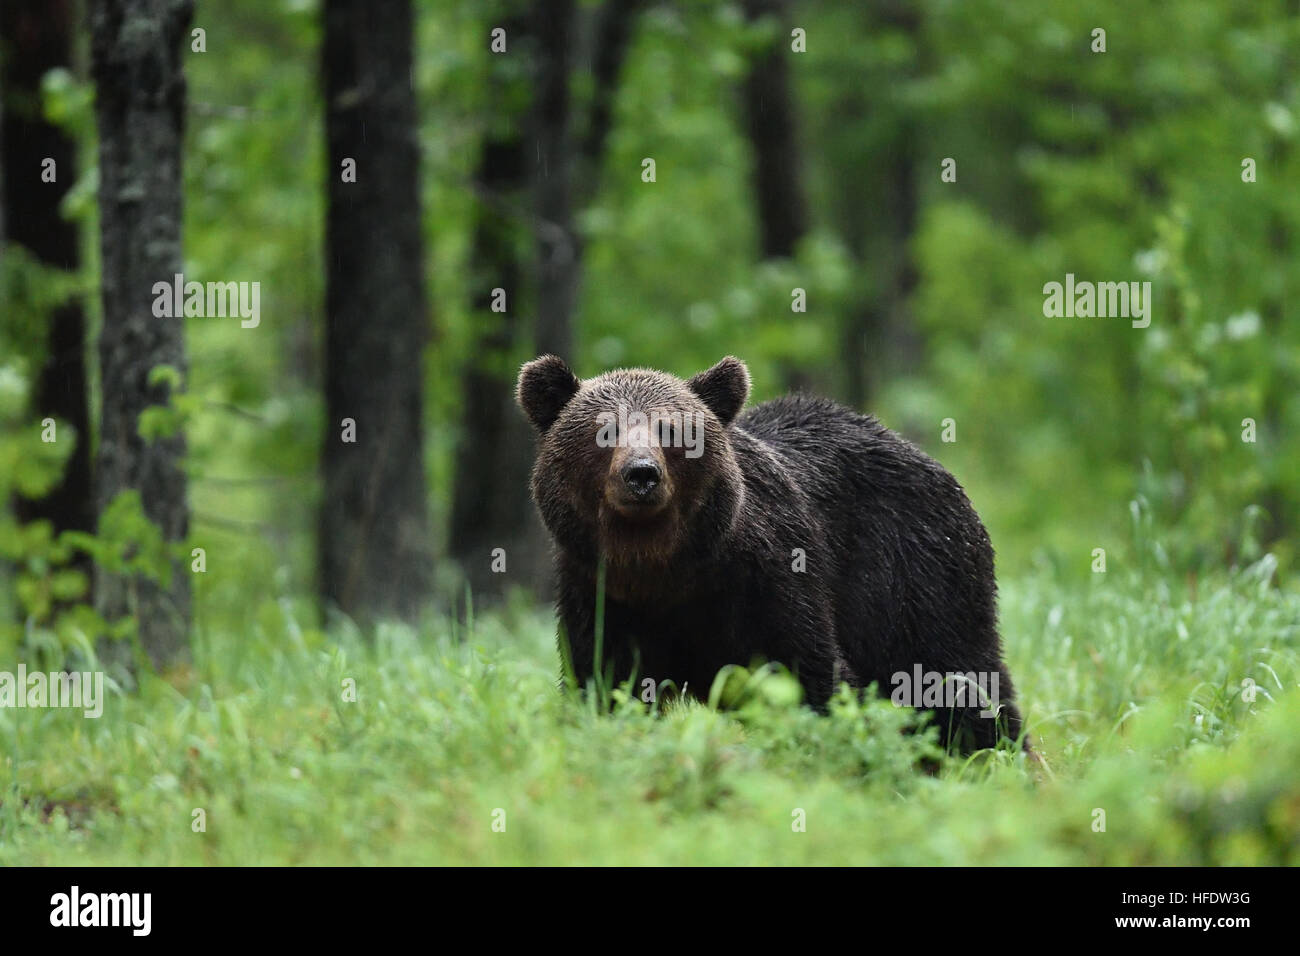 brown bear walking in forest. forest wildlife Stock Photo